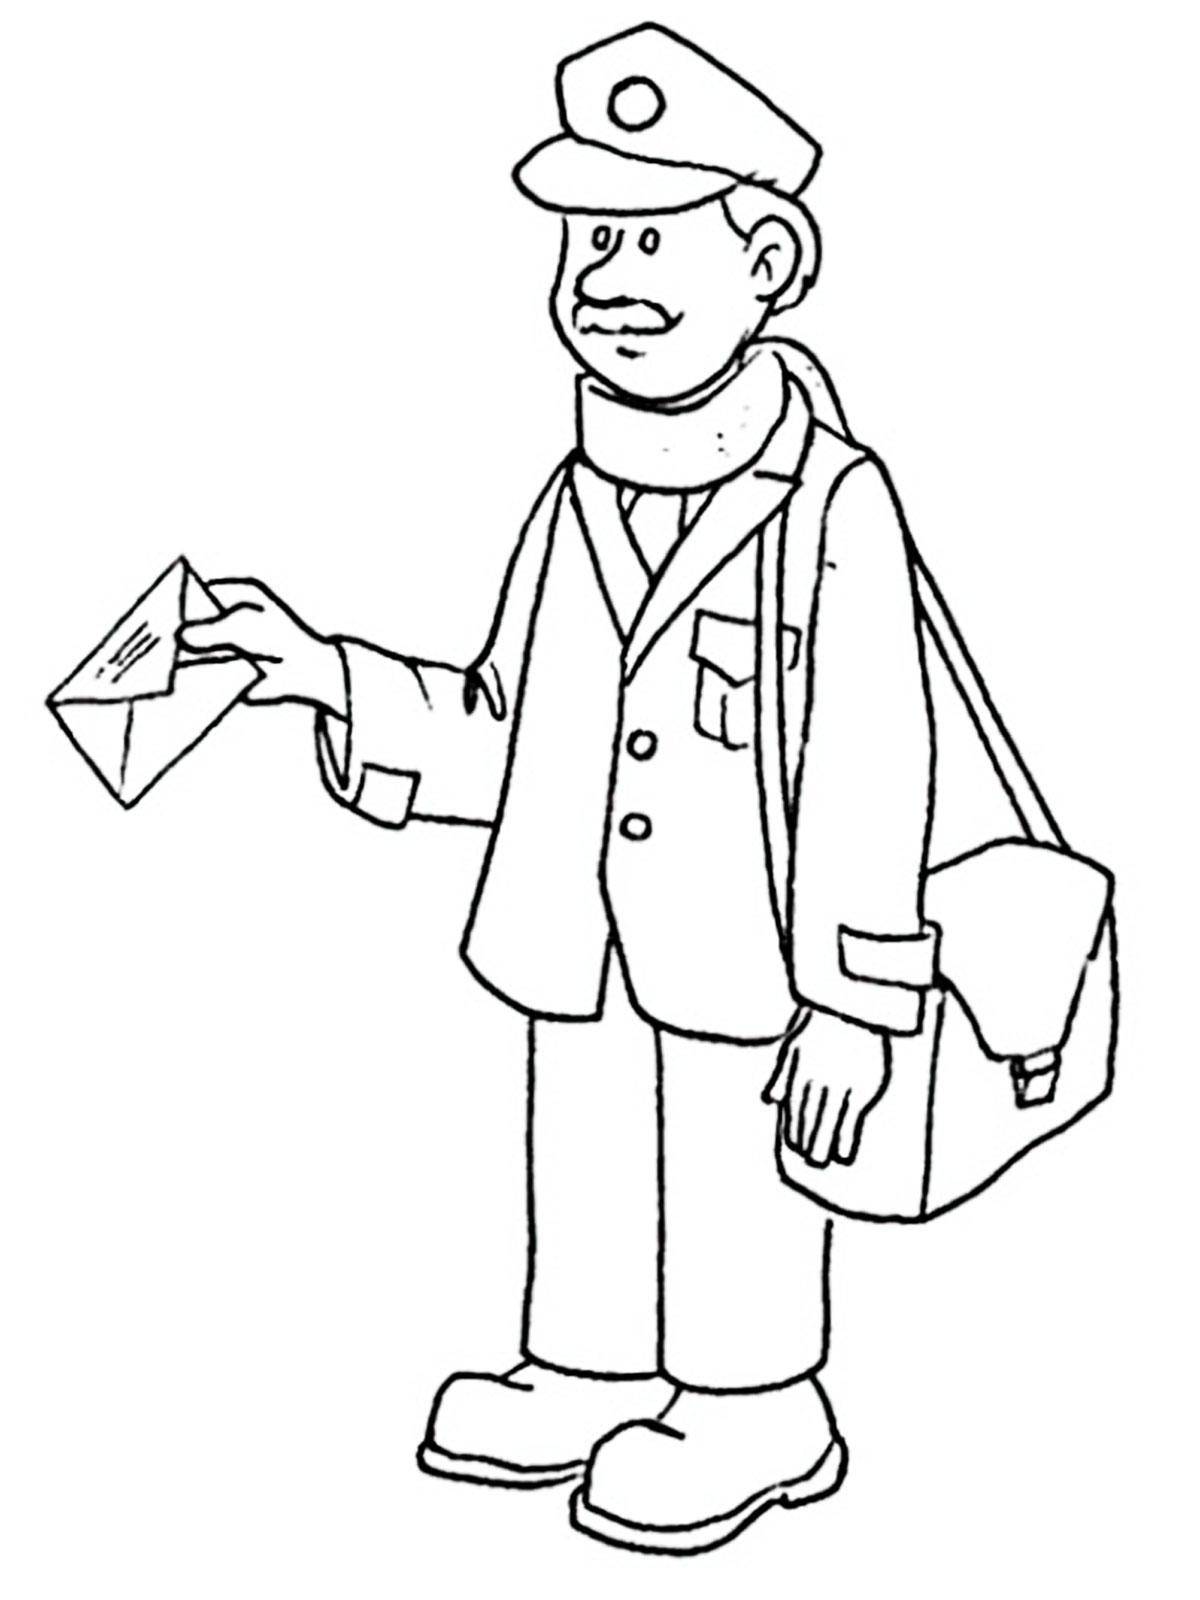 Coloring The postman. Category a profession. Tags:  Profession.